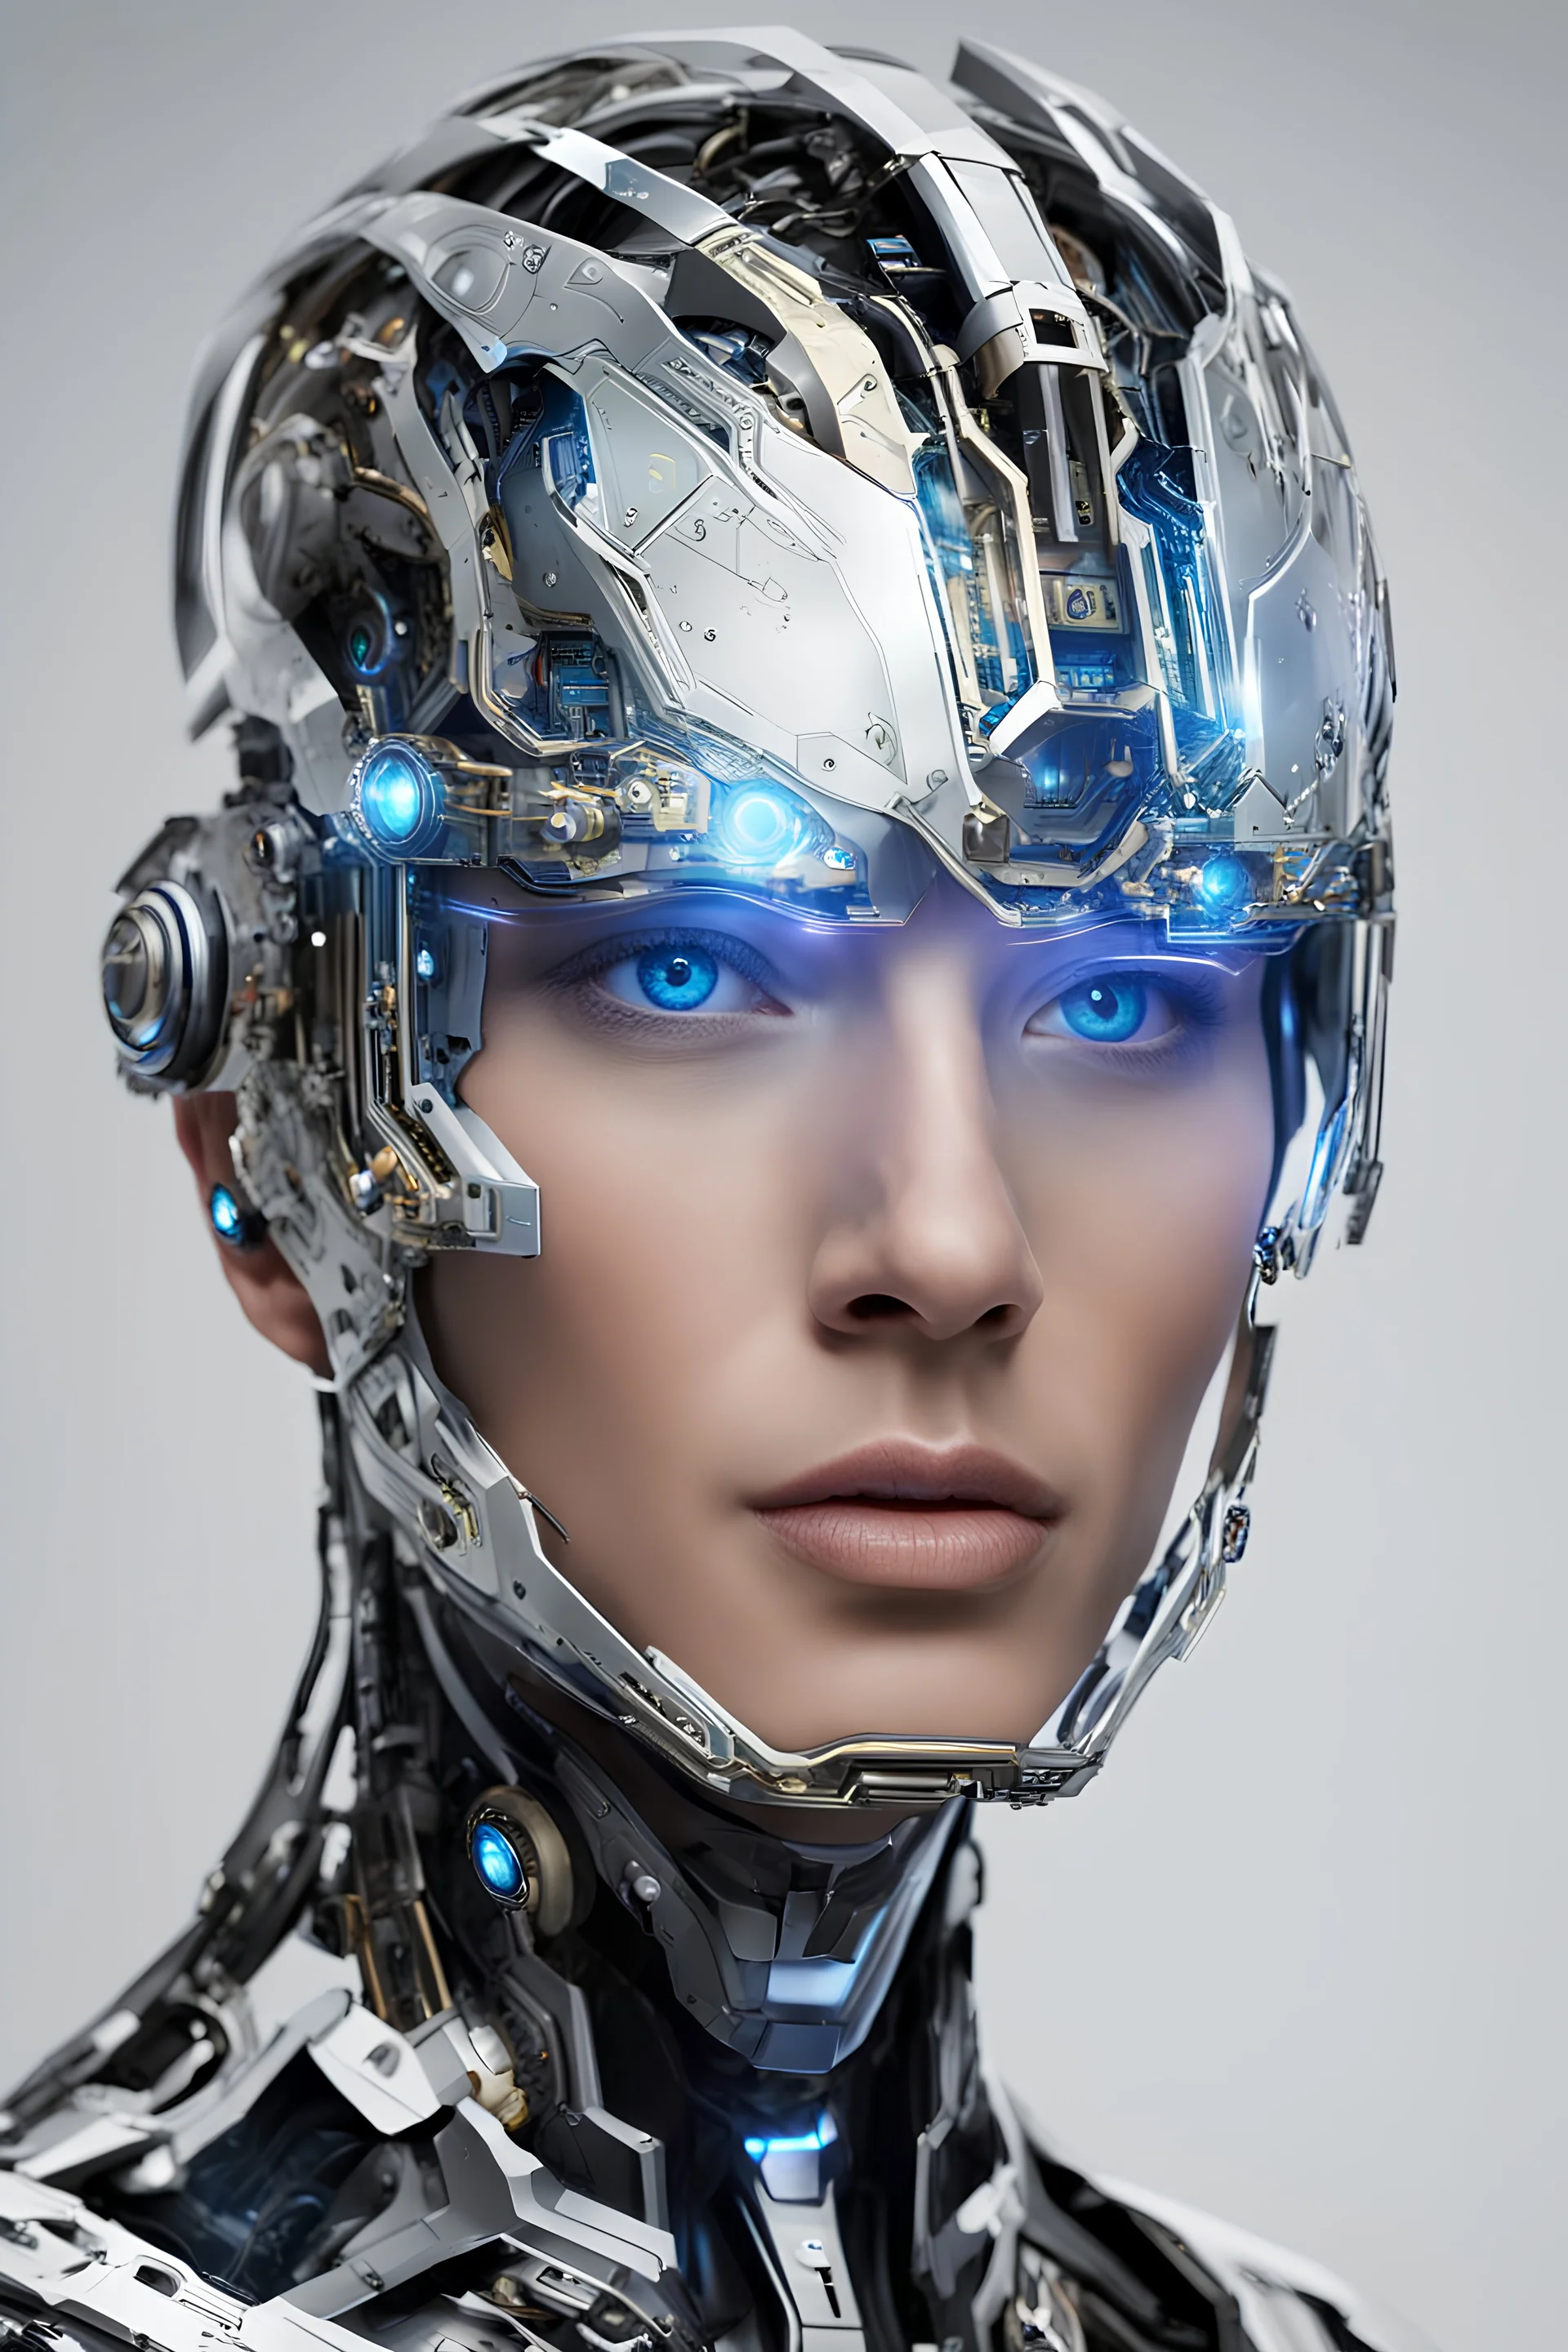 A futuristic cyborg with enhanced vision, wearing sleek, metallic headgear reminiscent of Google's Project Glass. The cyborg's face is half organic and half mechanical, with a glowing cybernetic eye that seems to be connected directly to their brain. The other eye is still human, but it's framed by intricate circuitry and a thin layer of protective iridescent film. The cyborg's skin is a blend of synthetic and natural materials, with visible wires and tubes running beneath the surface.reflection